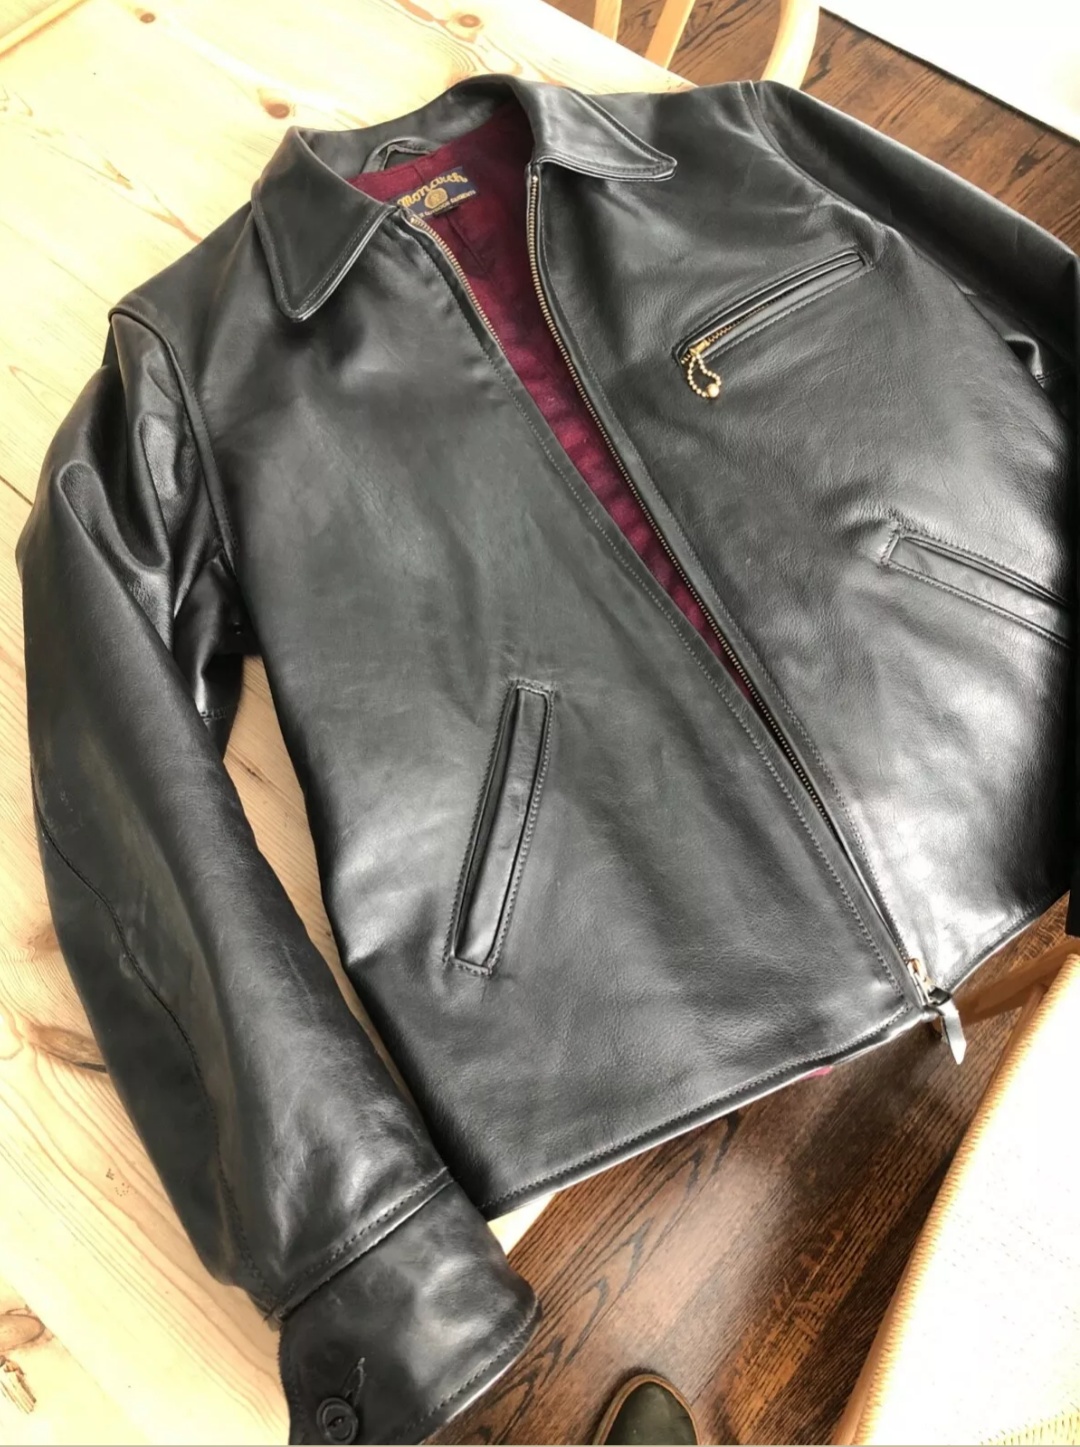 Finds and Deals - Leather Jacket Edition | Page 62 | The Fedora Lounge